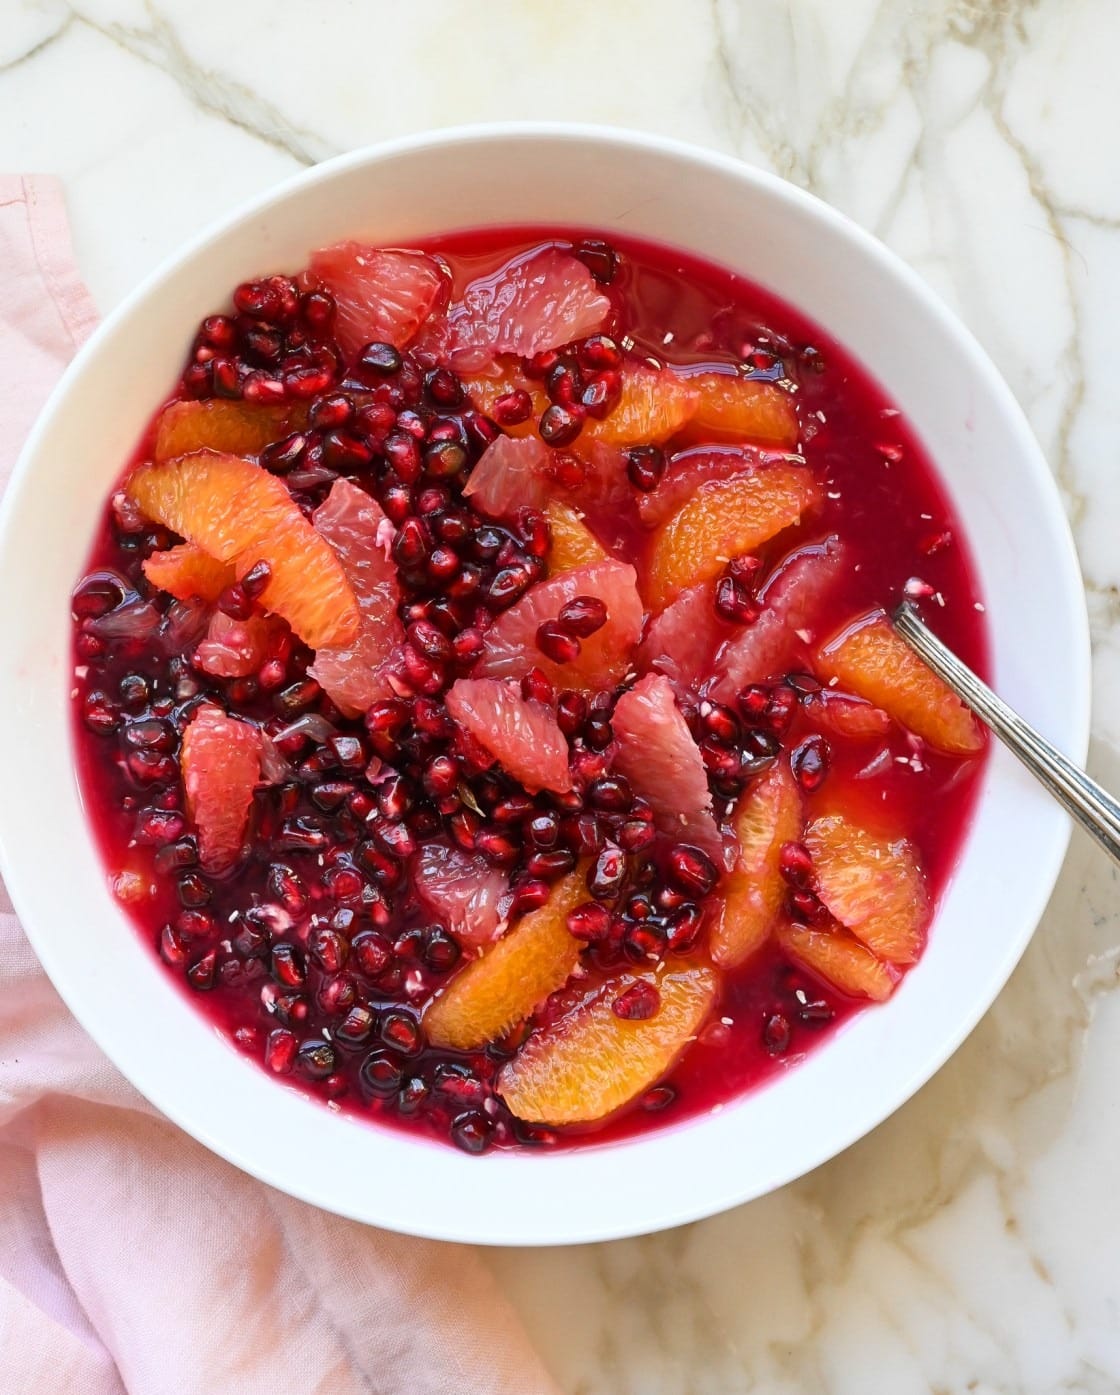 Fruit salad made with juicy pomegranate arils, grapefruits, and oranges served on a bowl